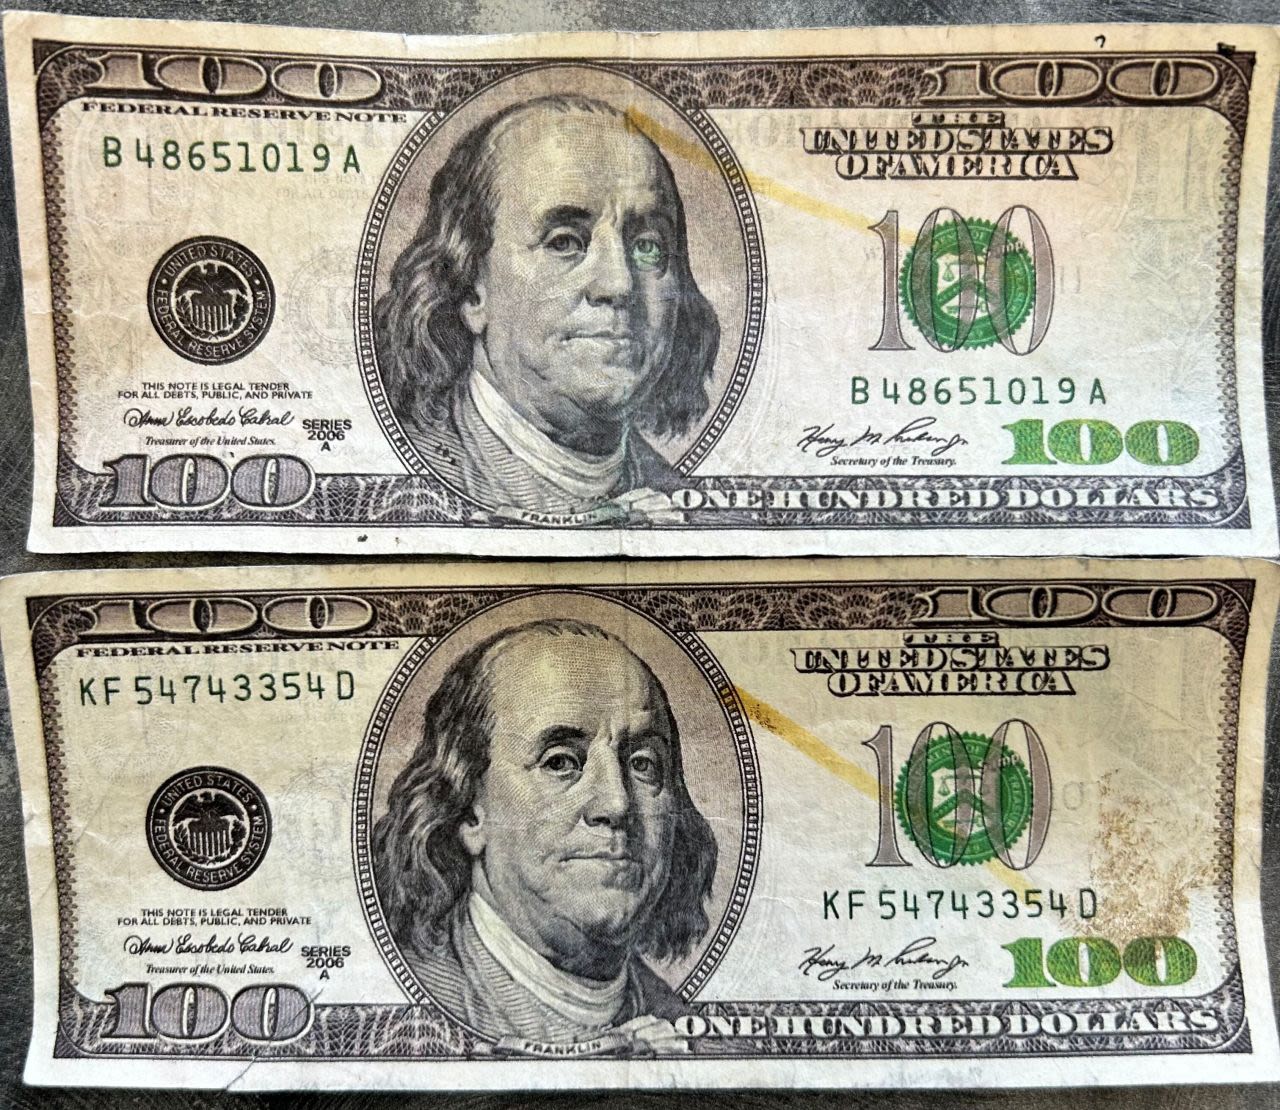 Hilo man charged with forgery in ʻwashedʻ $100 bill case